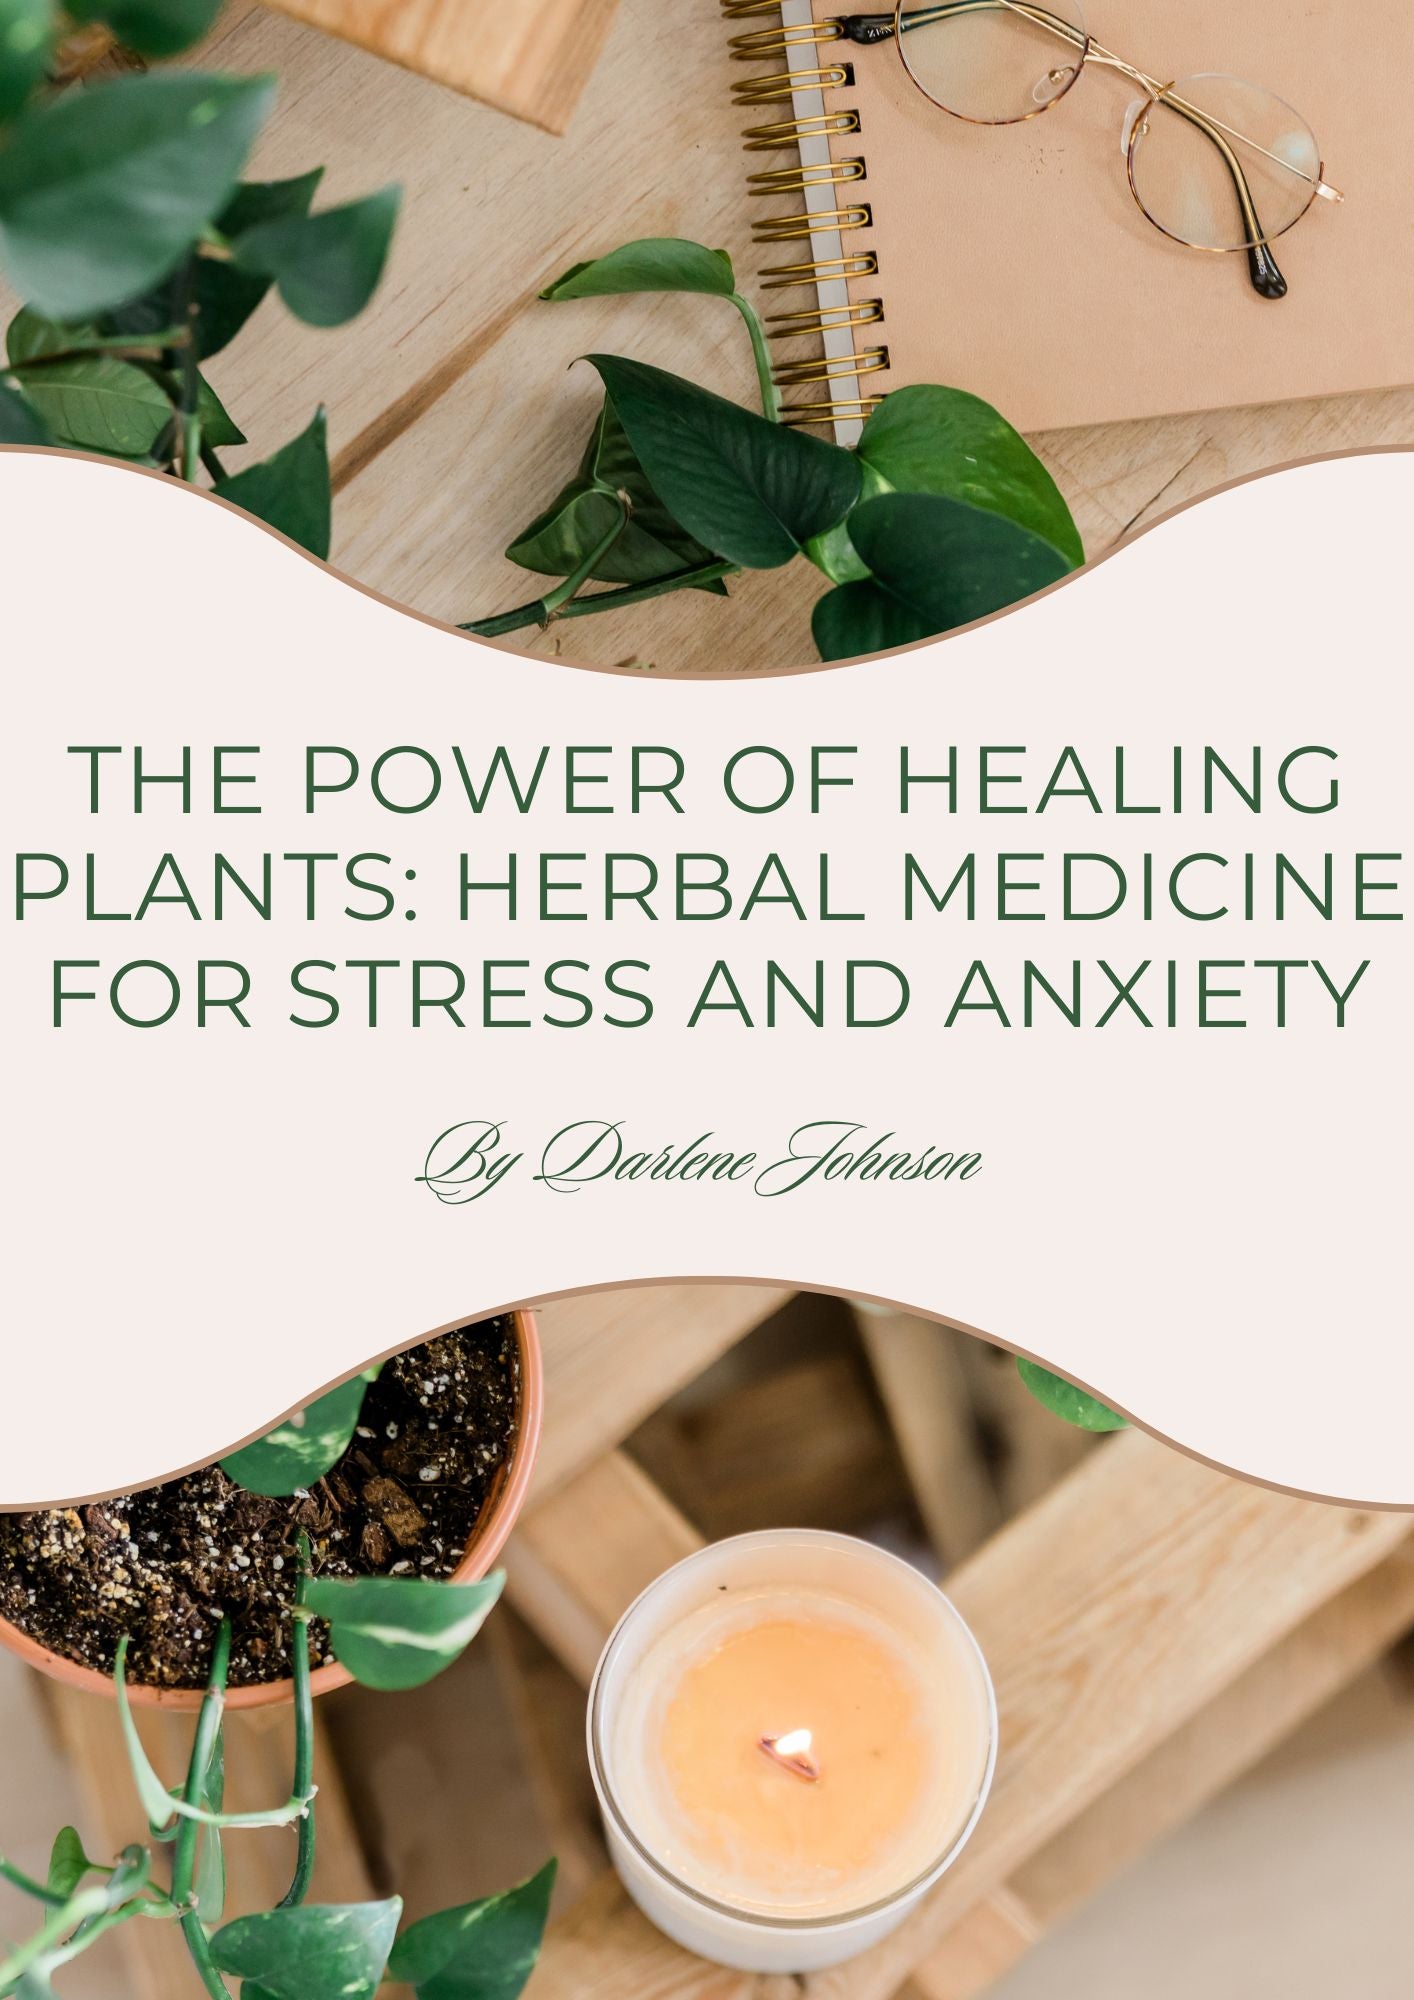 The Power of Healing Plants: Herbal Medicine for Stress and Anxiety